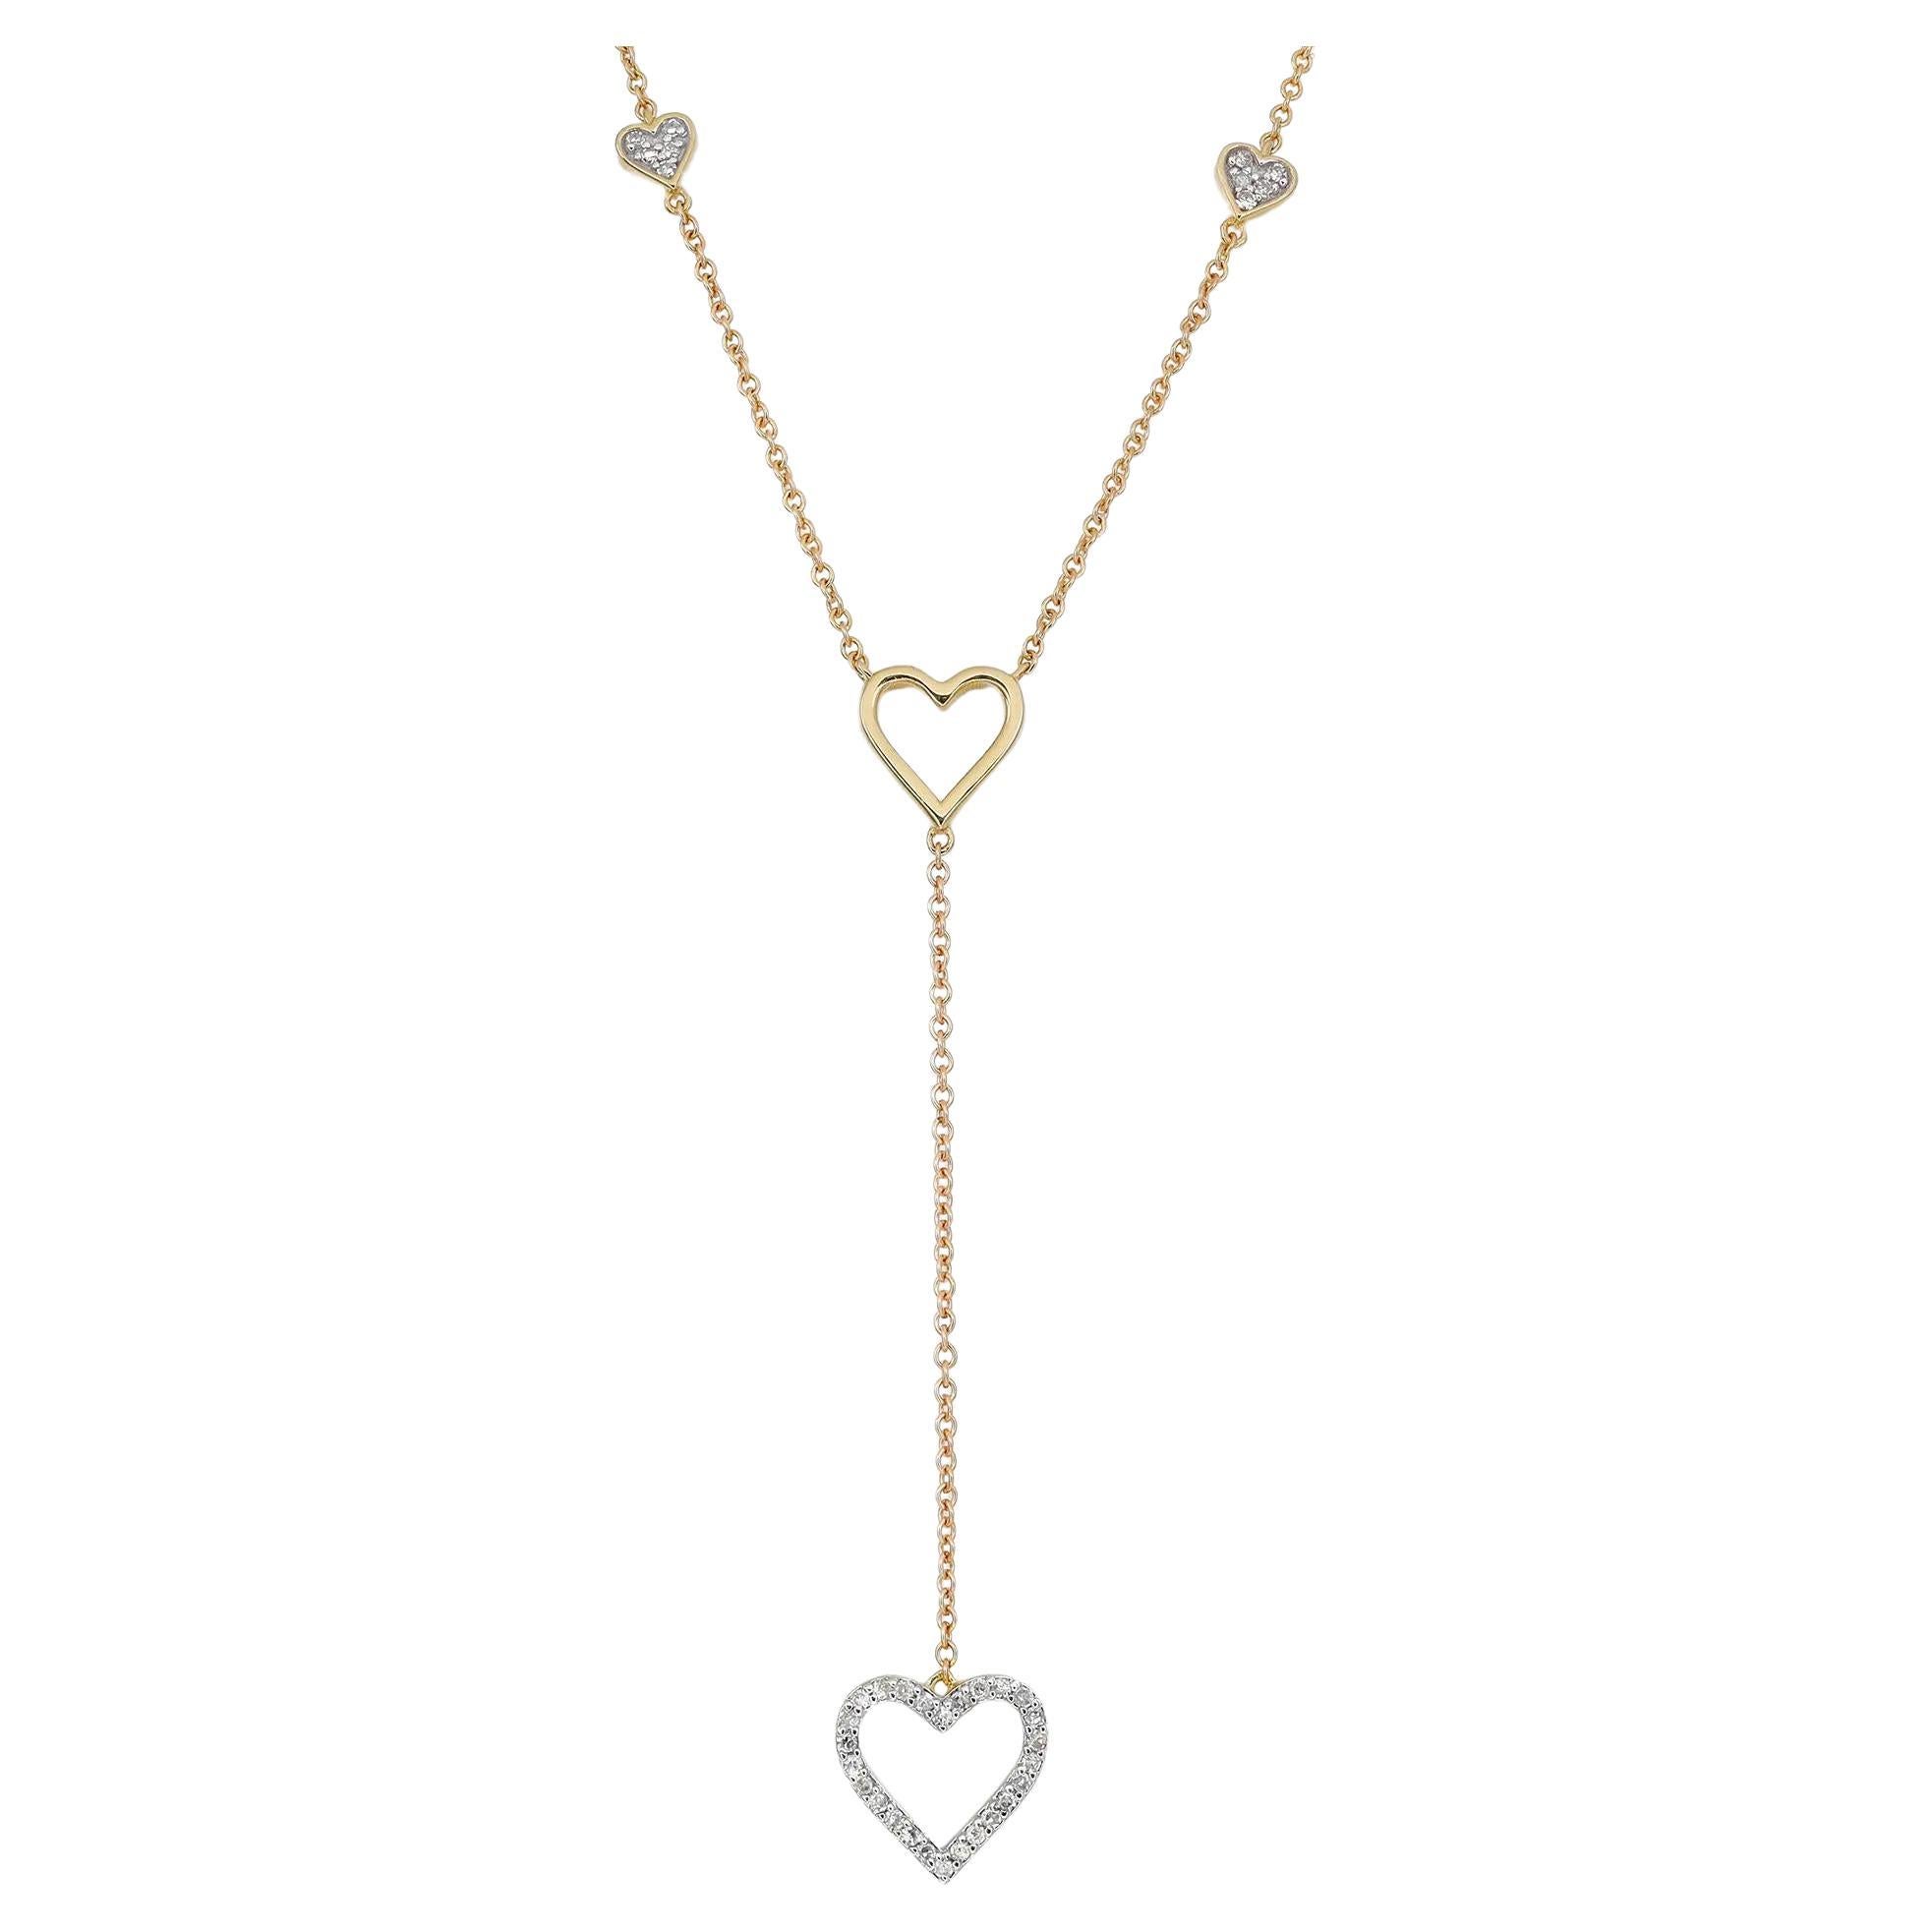 Diamond Heart Lariat Necklace Round Cut In 14K Yellow Gold 0.14Cttw For Sale